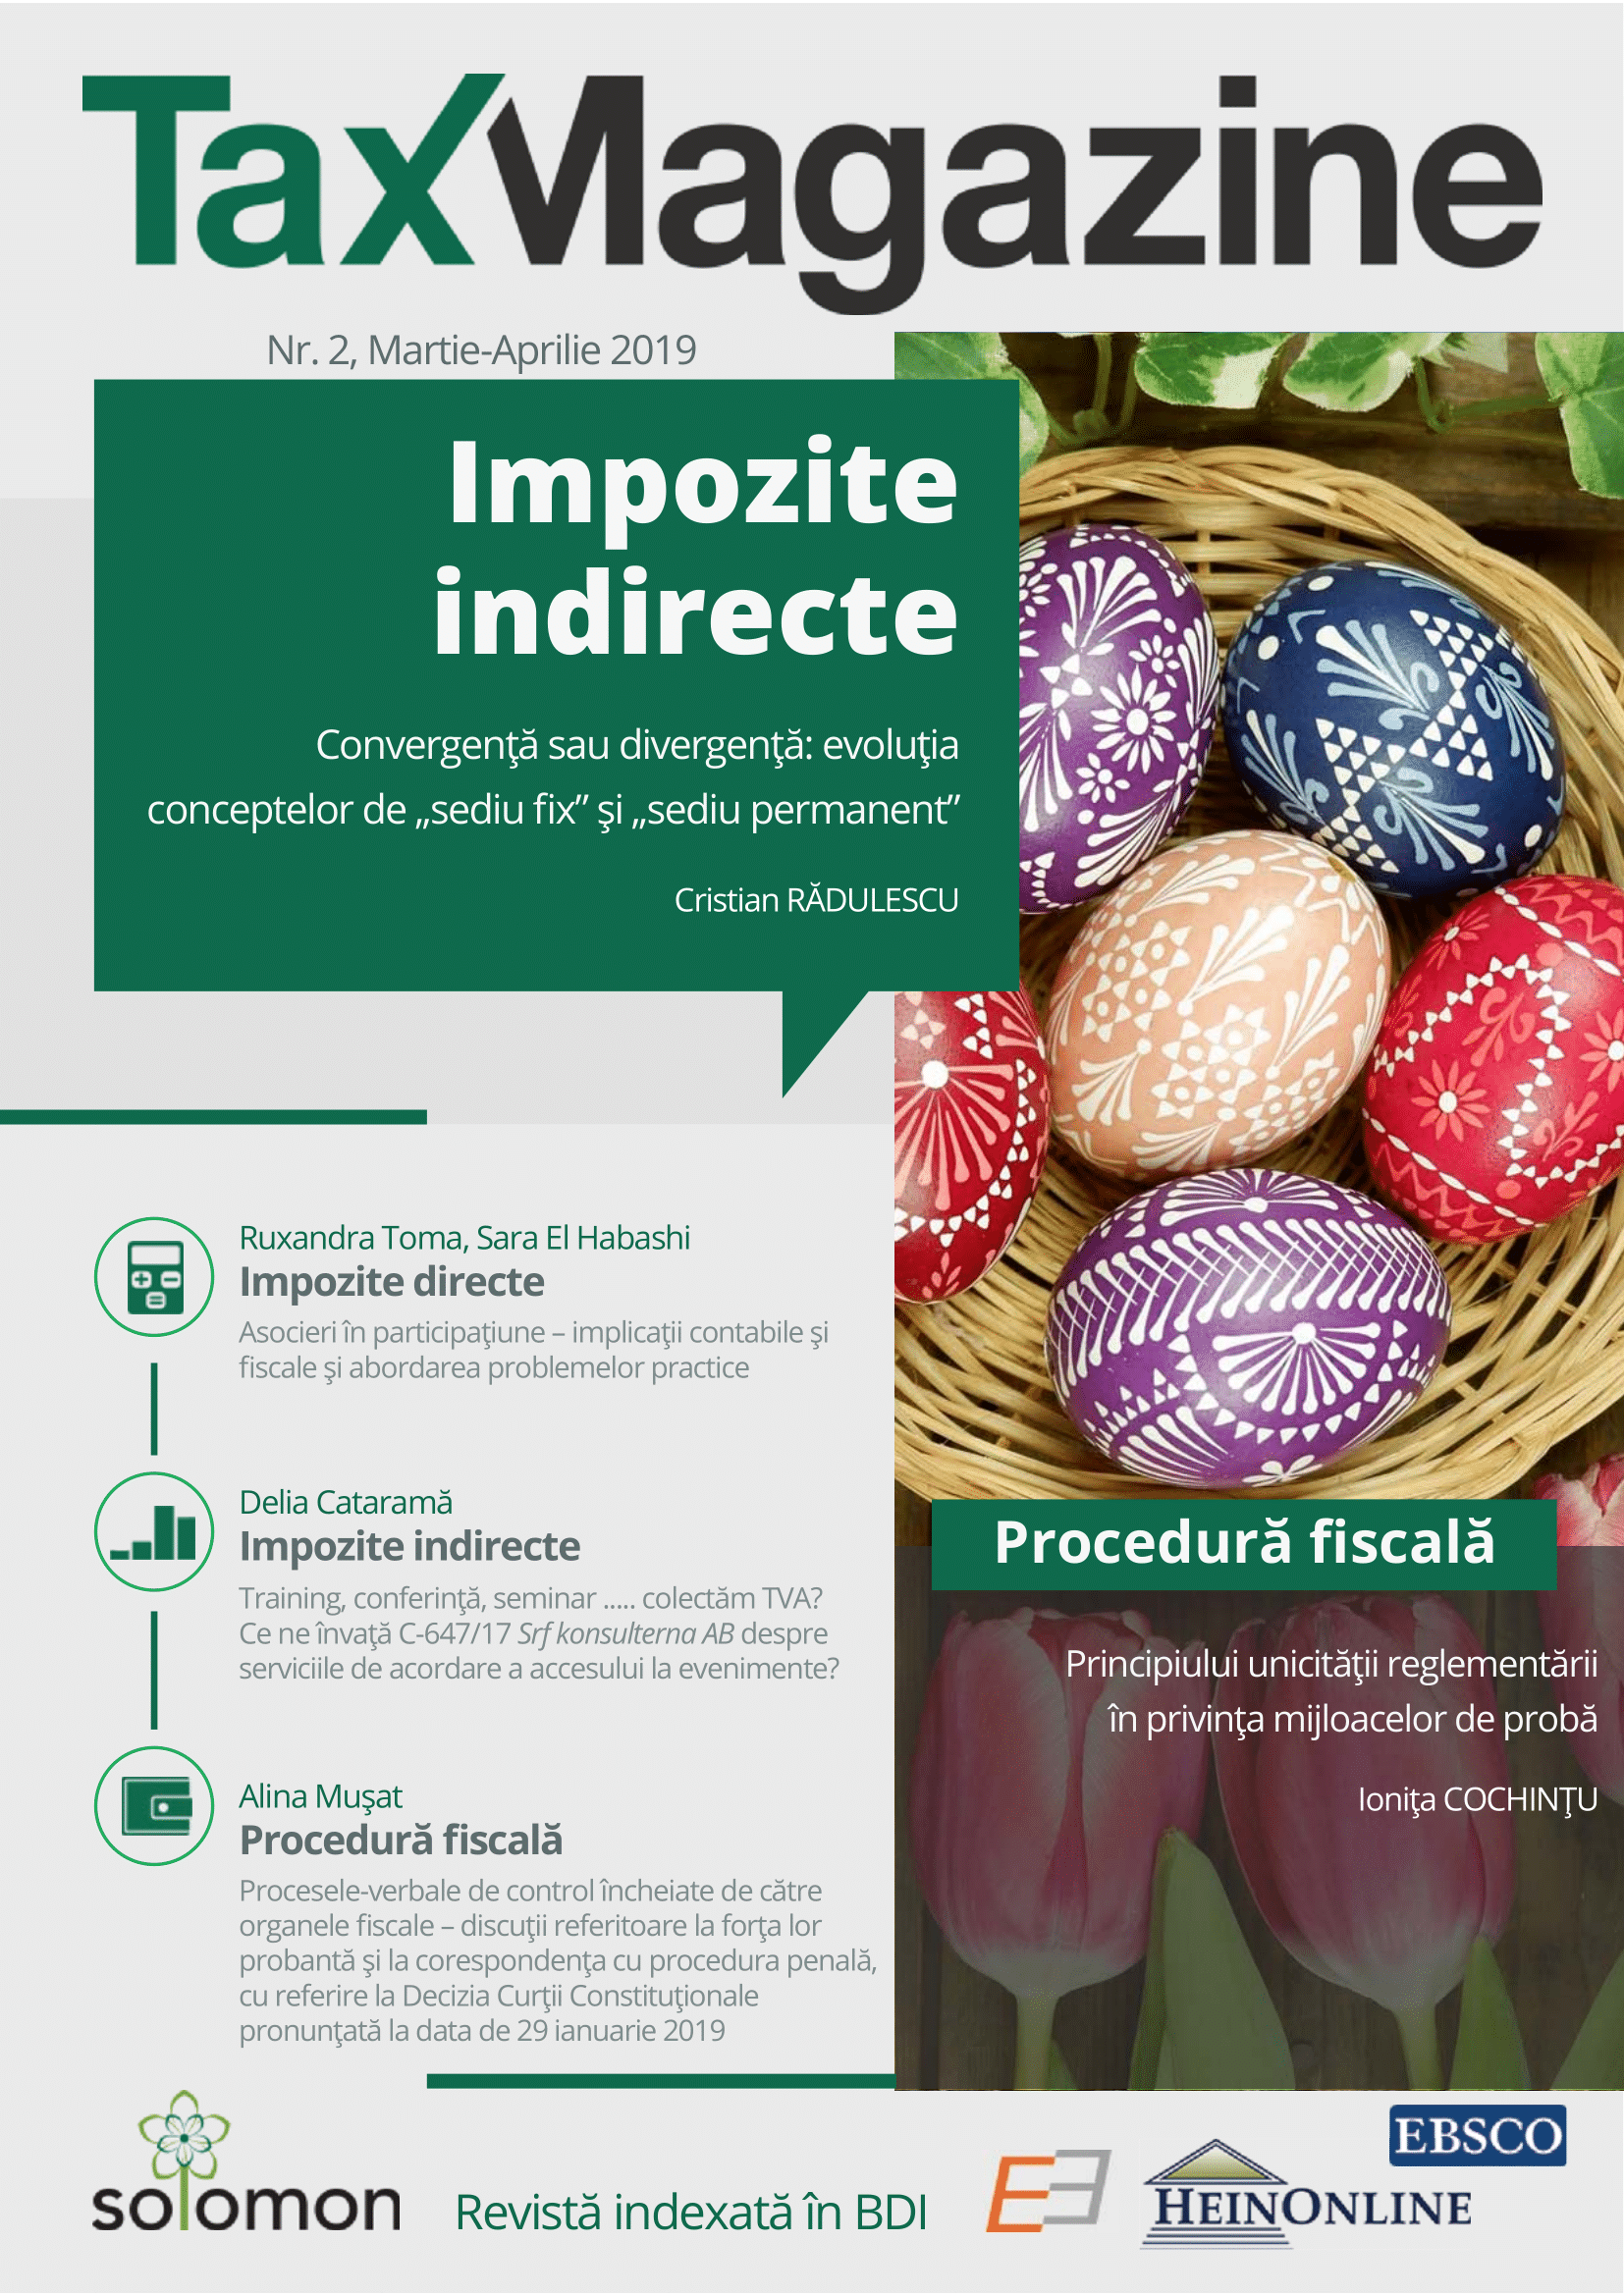 Inspection reports issued by tax authorities – discussions on their probative force and correspondence with the criminal procedure, with reference to the Constitutional Court of Romania Decision issued on January 29, 2019 Cover Image